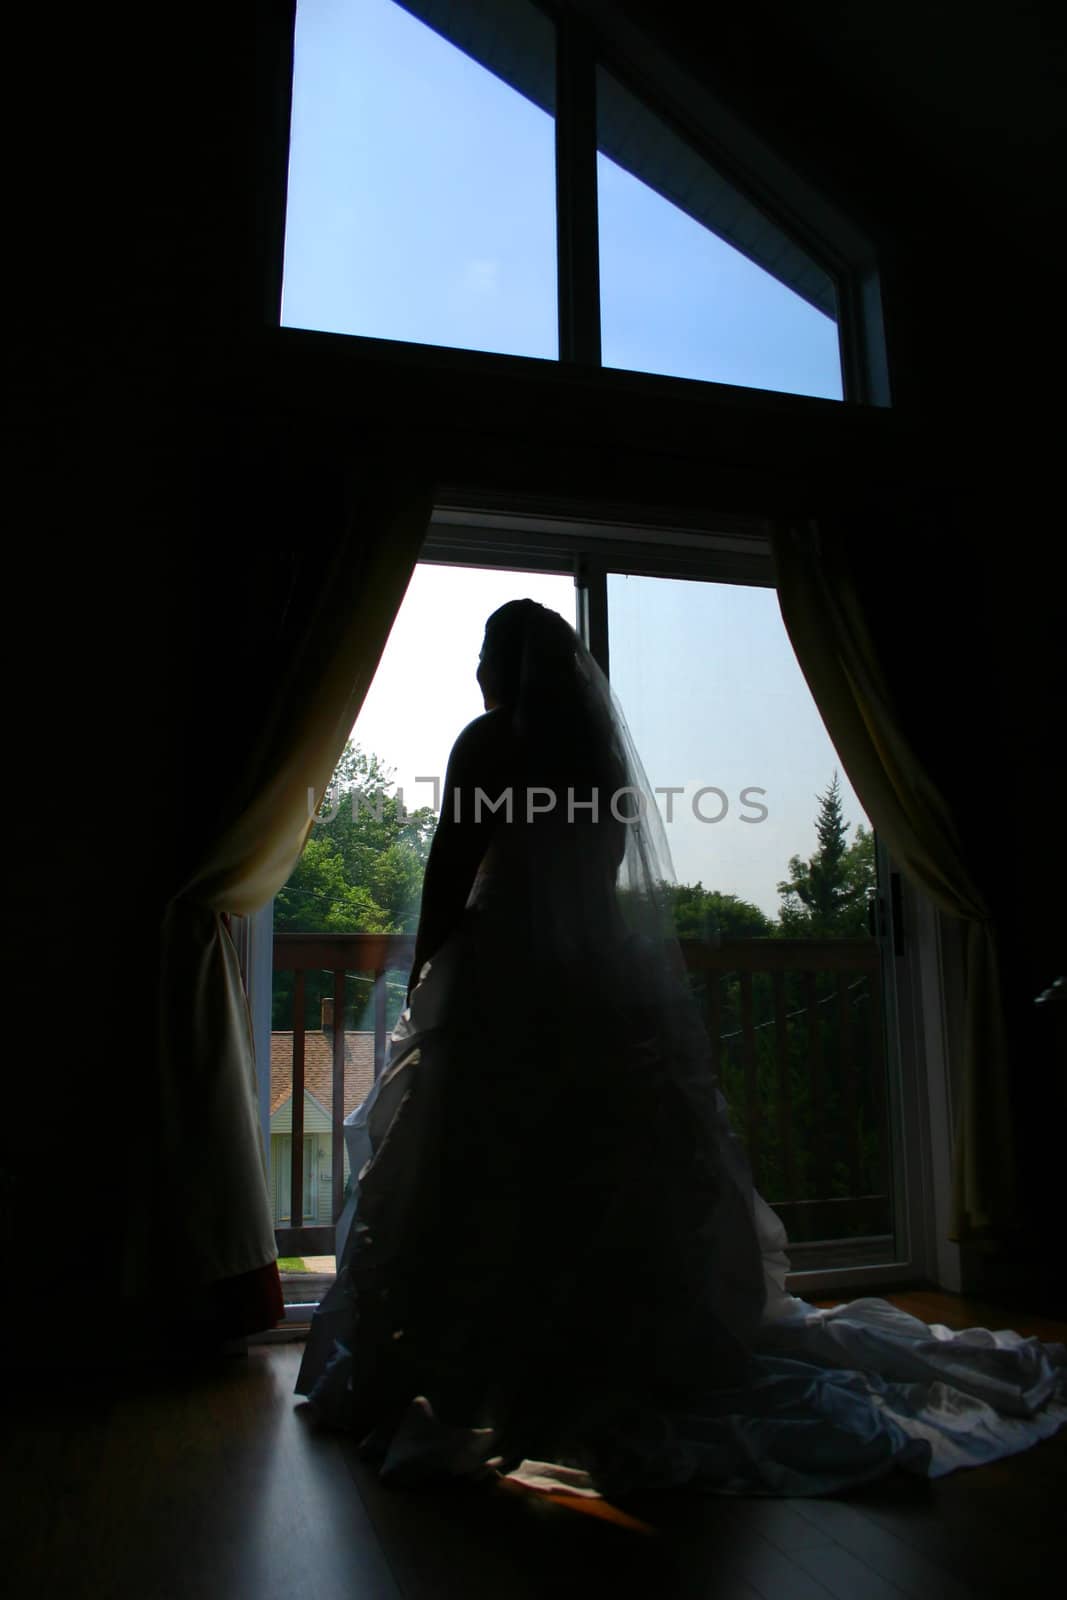 A bride eagerly pondering her wedding day at the front window.